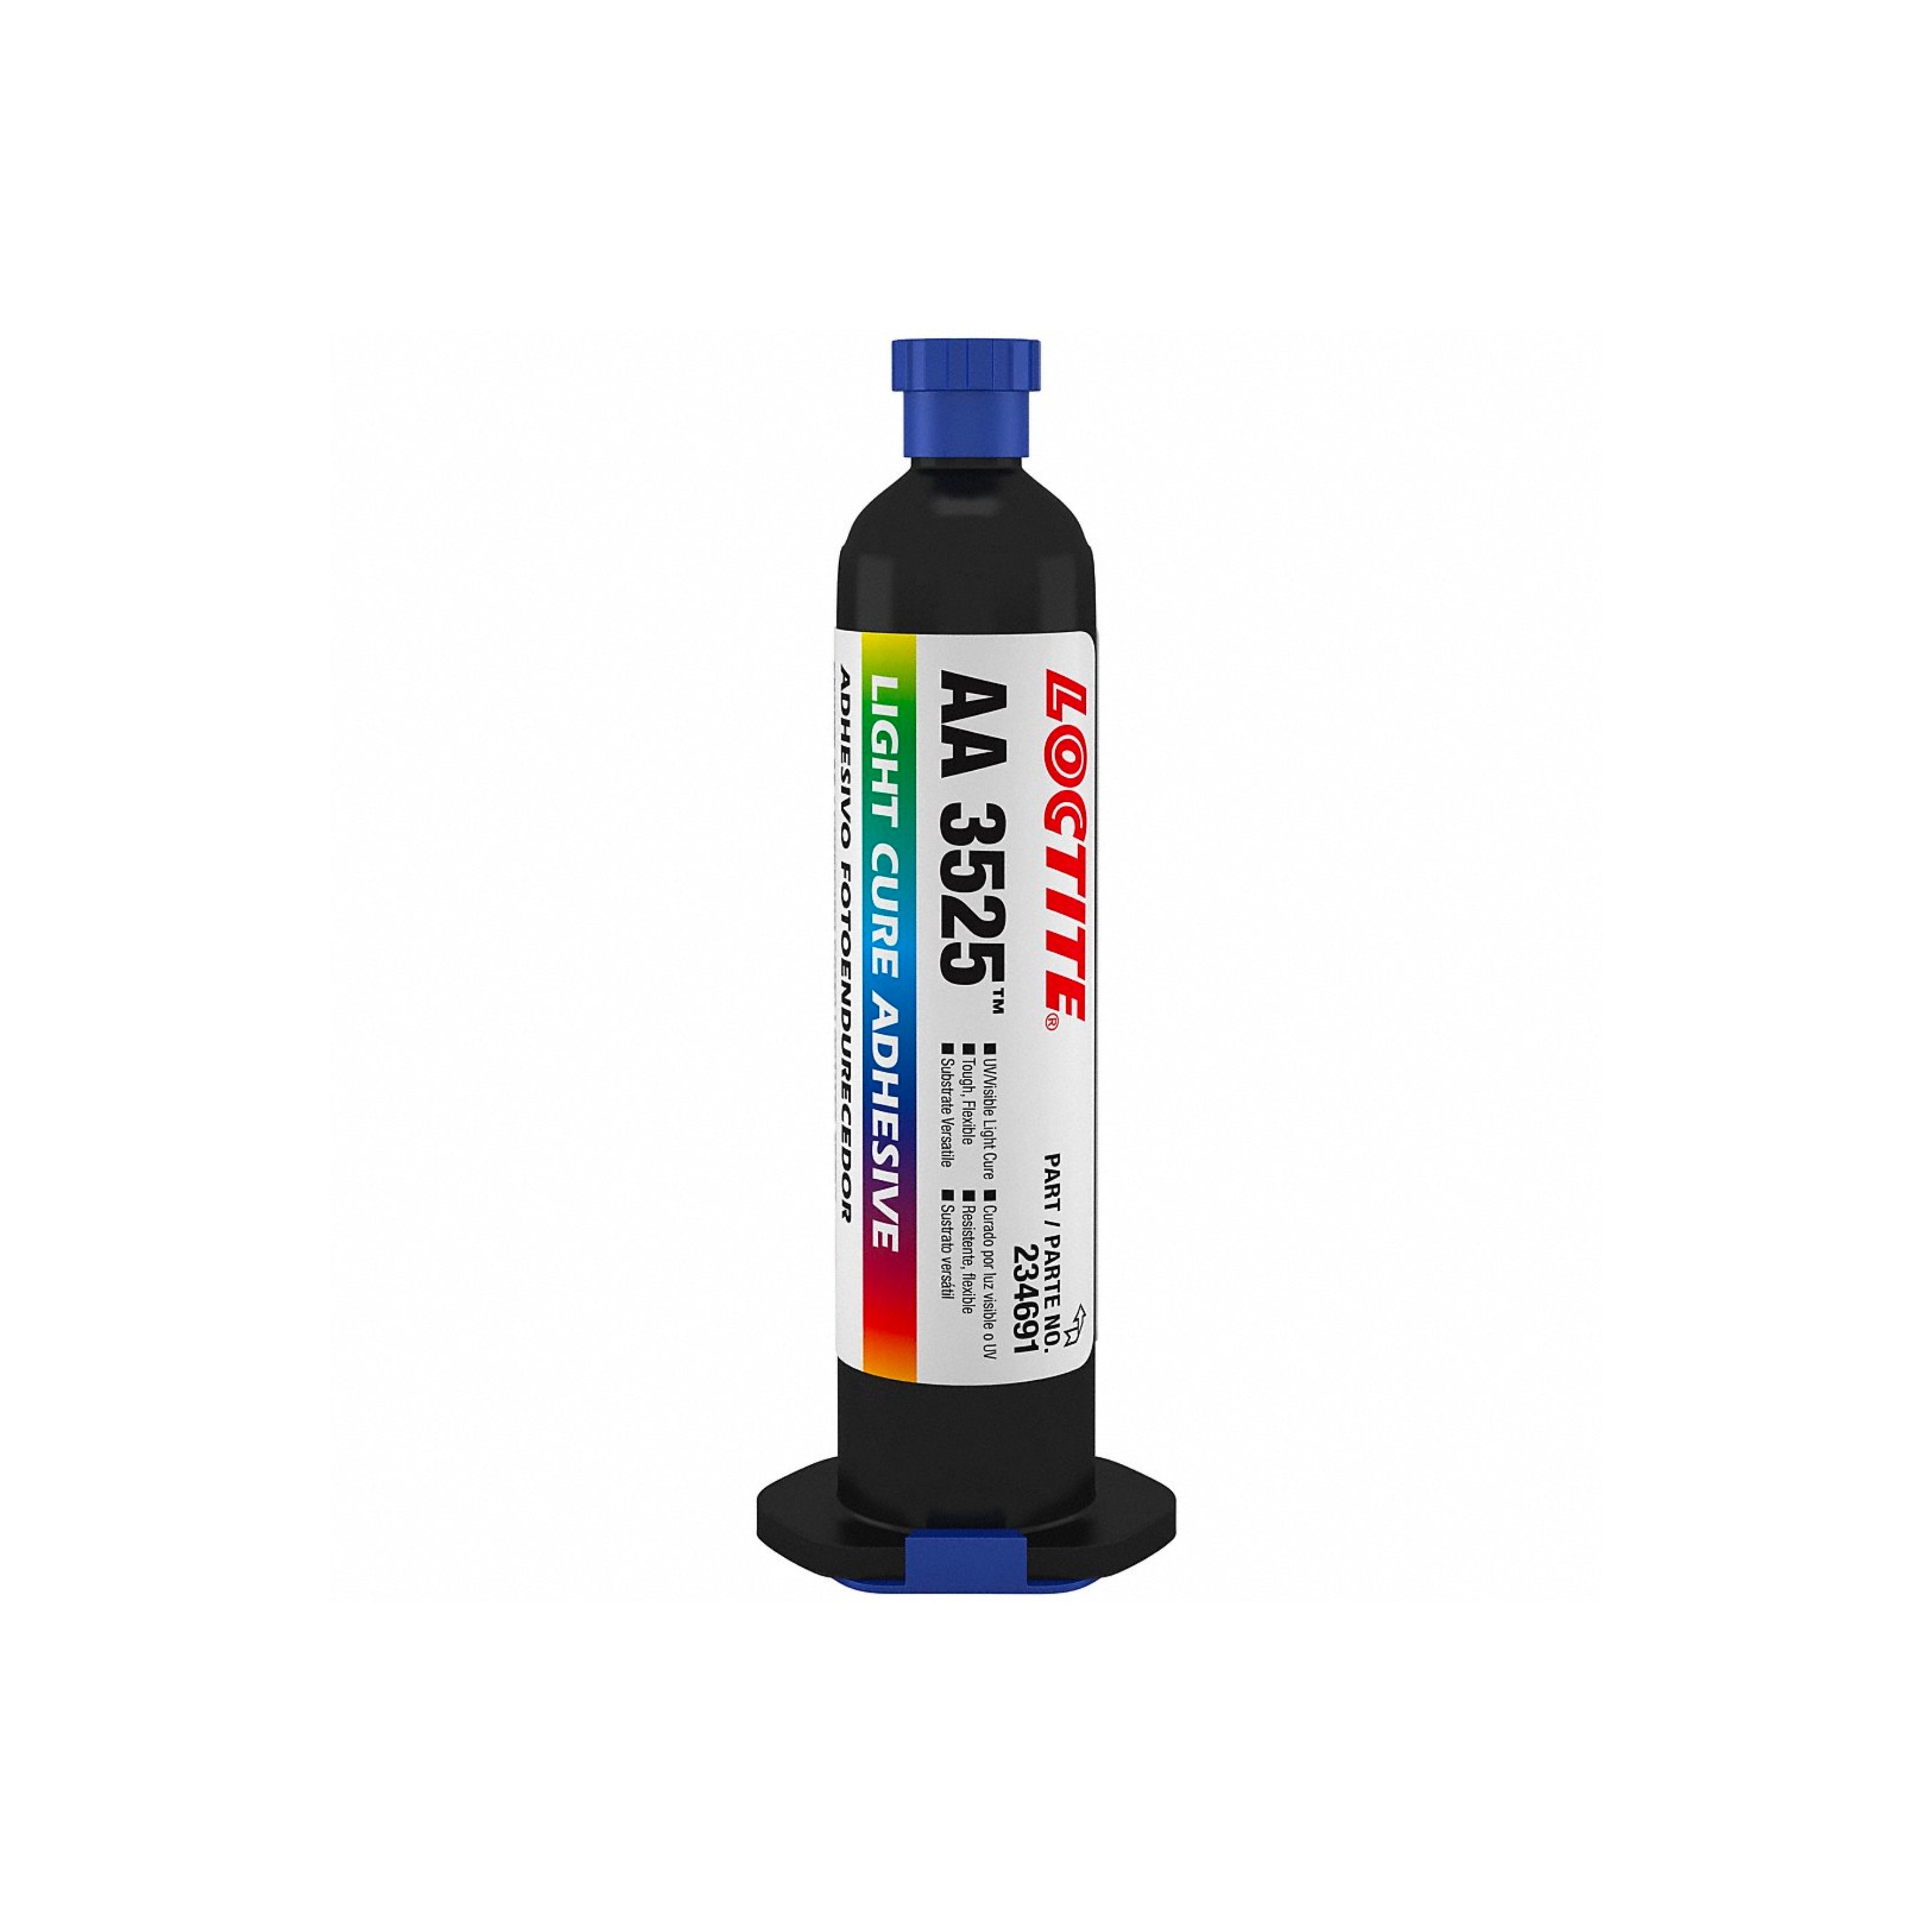 Loctite AA 349 Light Cure Adhesive